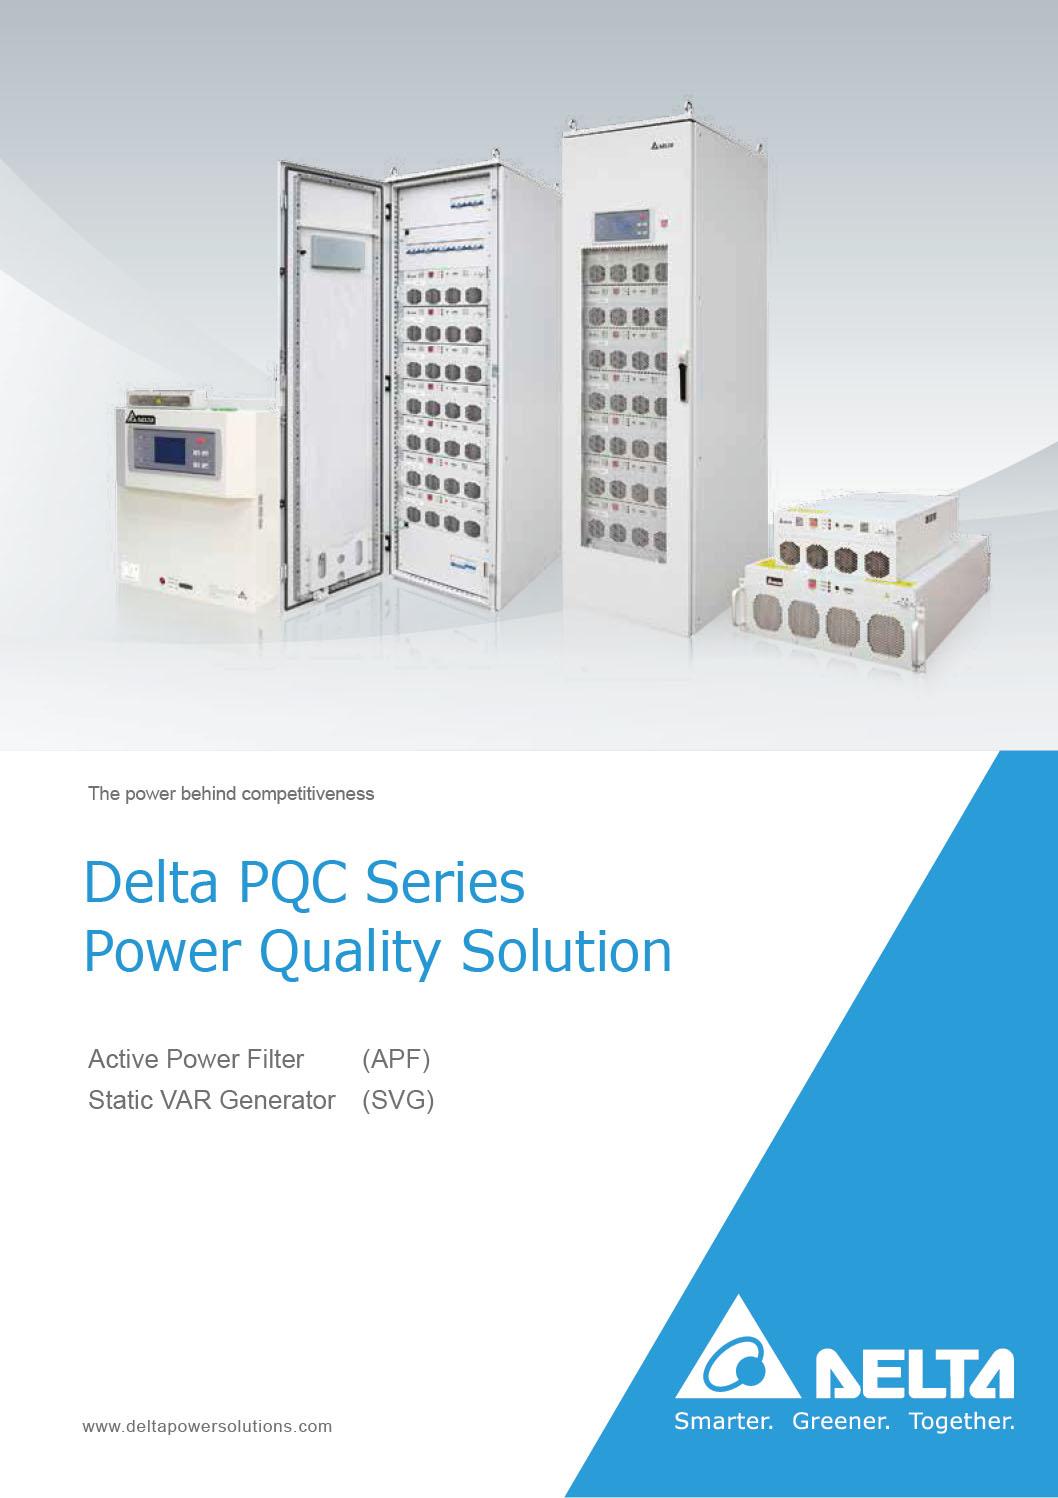 Delta-PQC-Power Quality Solution supplied by ElectroMechanica